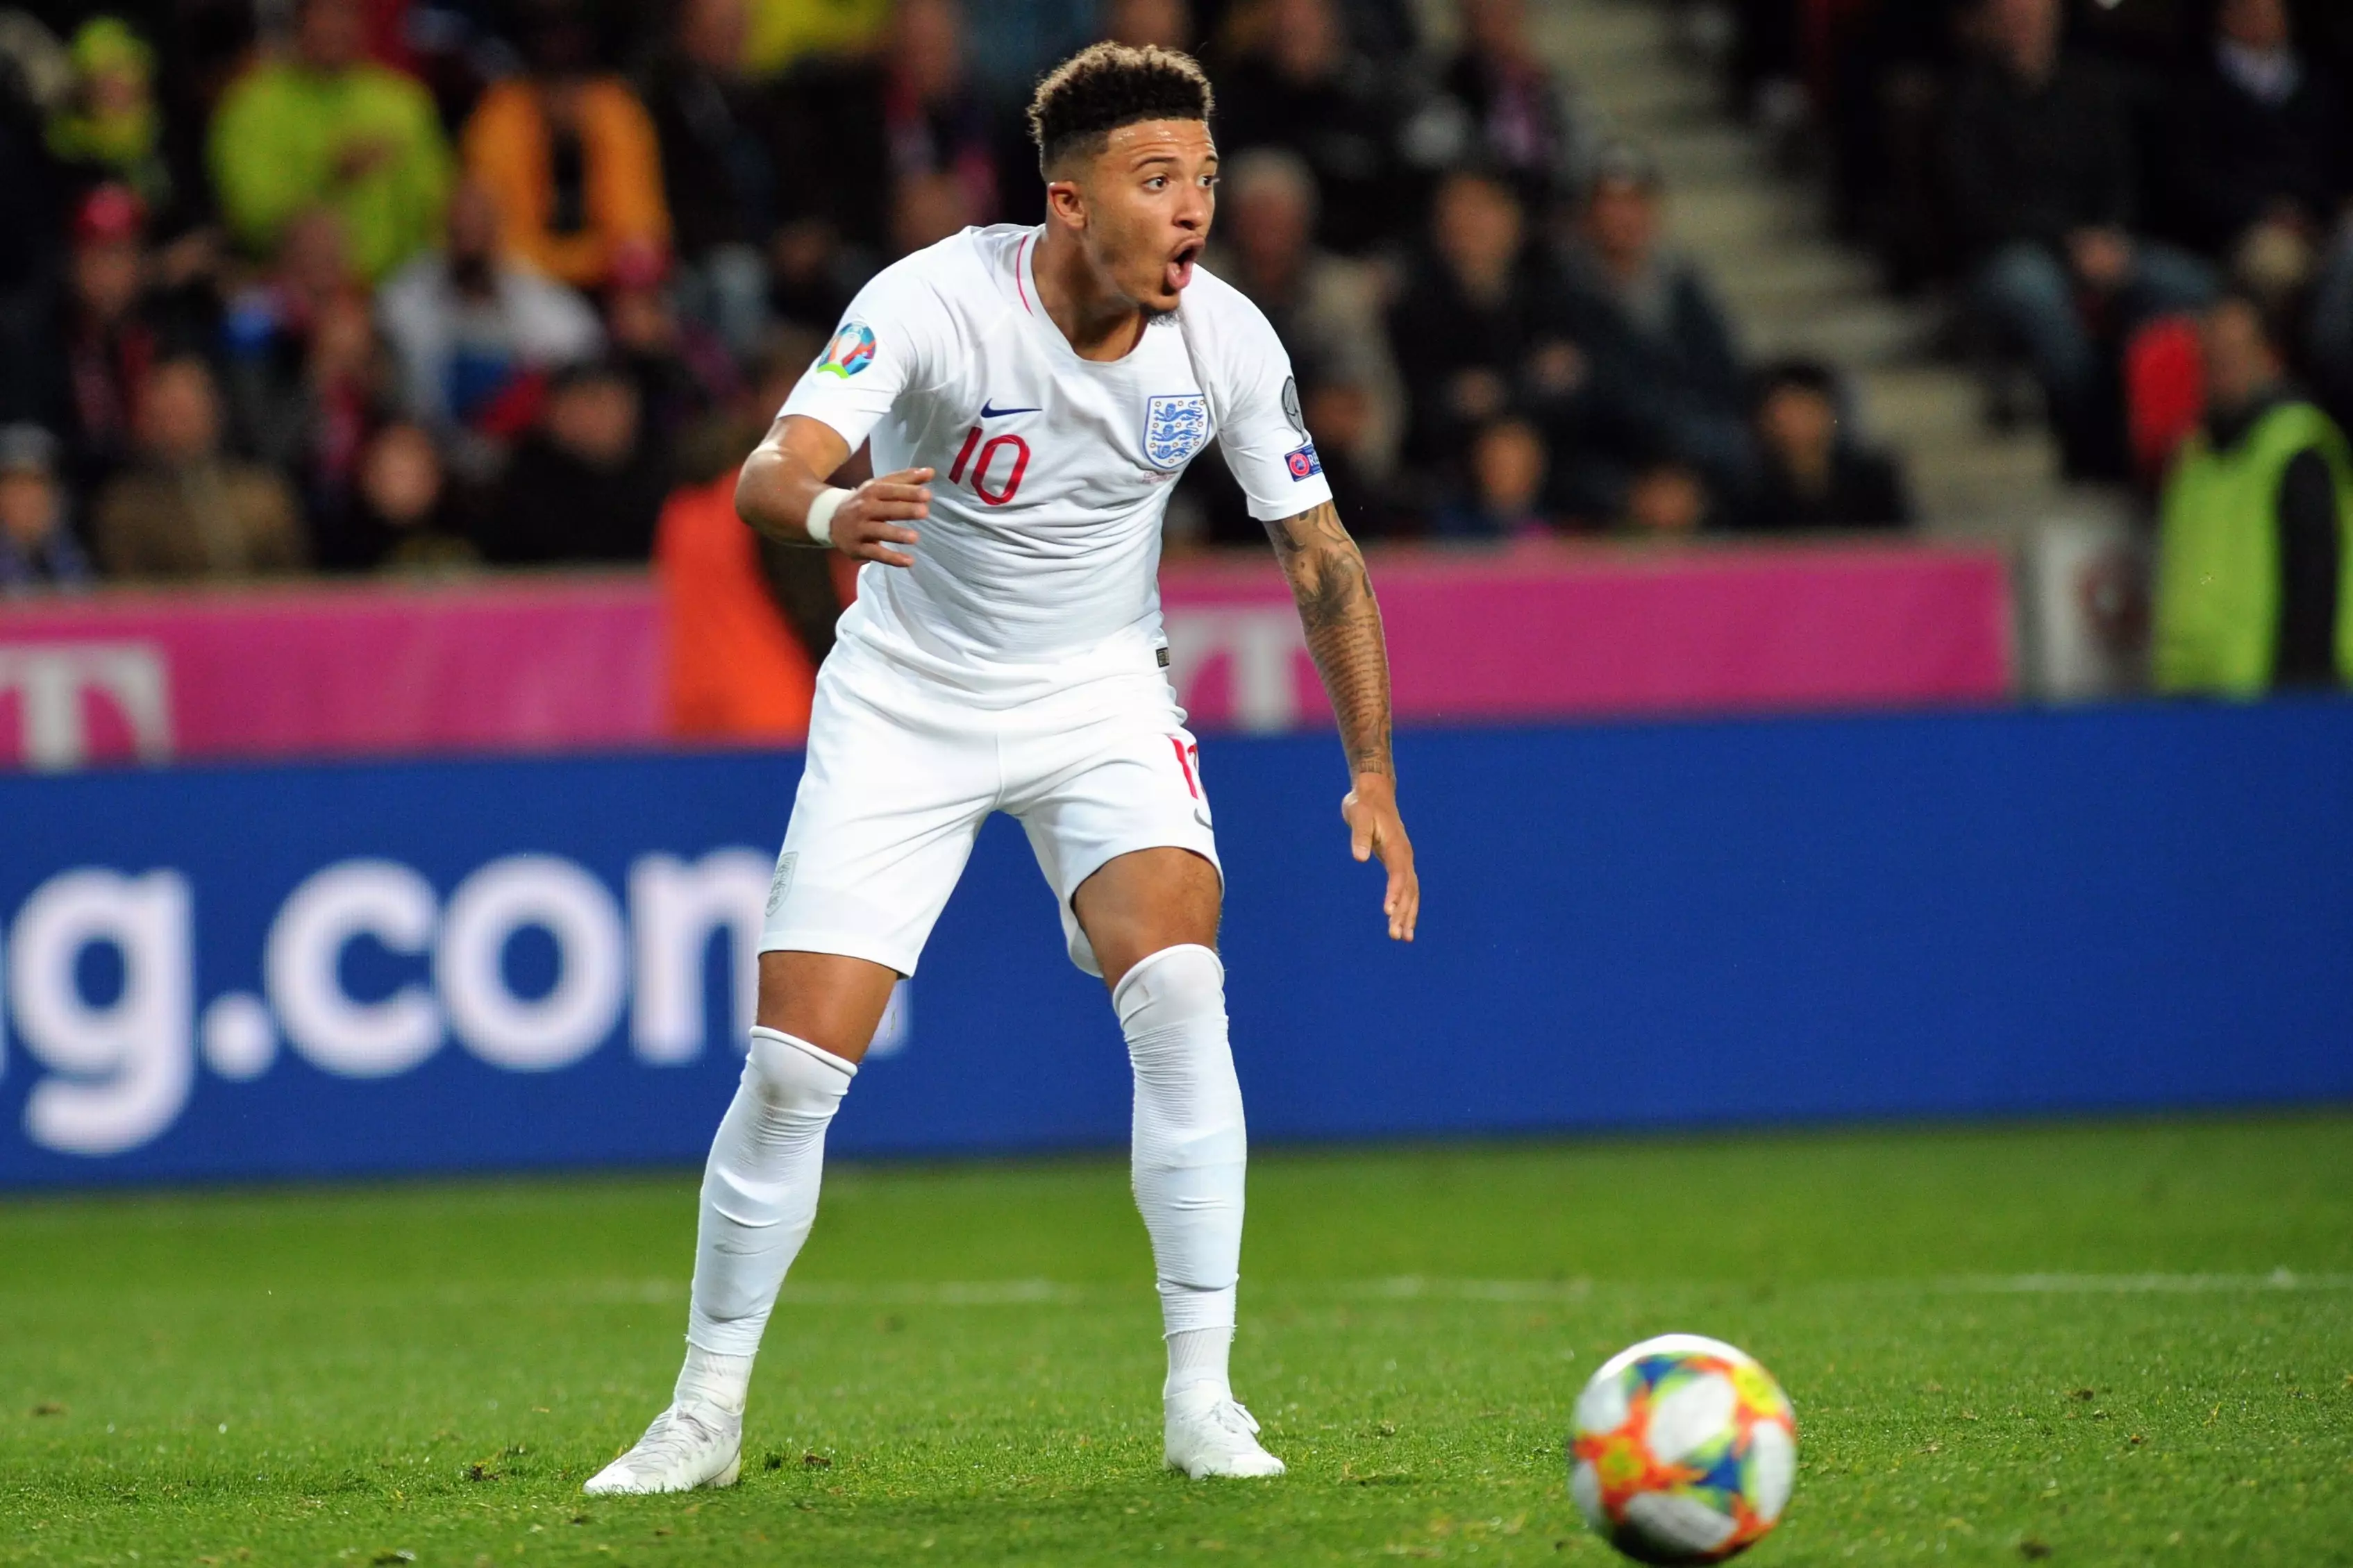 Jadon Sancho was with the England team this week for their games against Czech Republic and Bulgaria